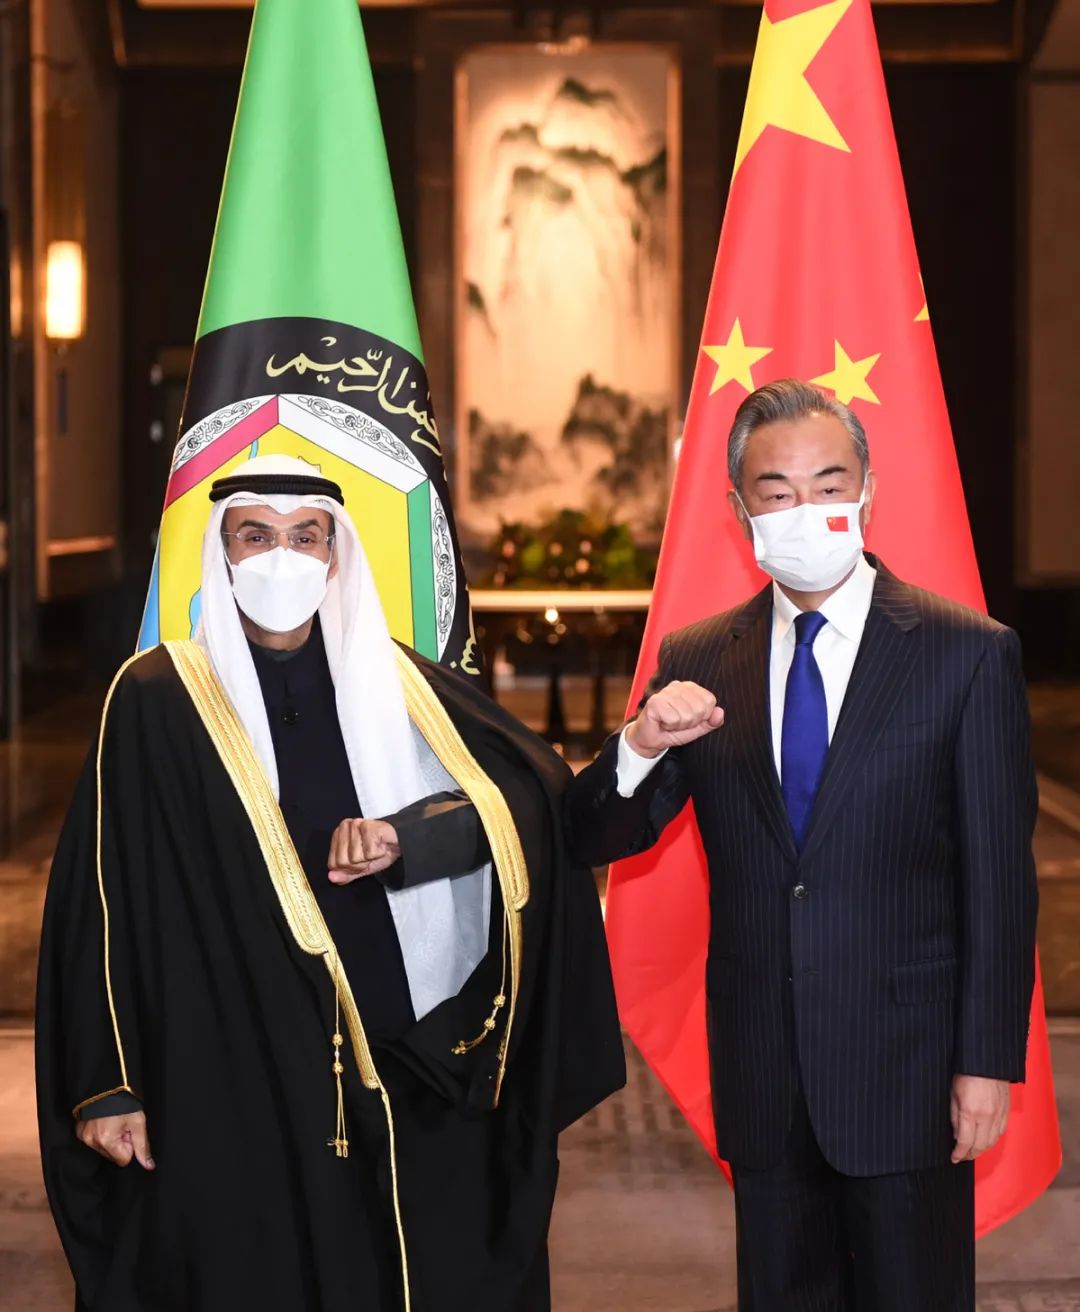 China replaces the EU as the largest trading partner of the GCC